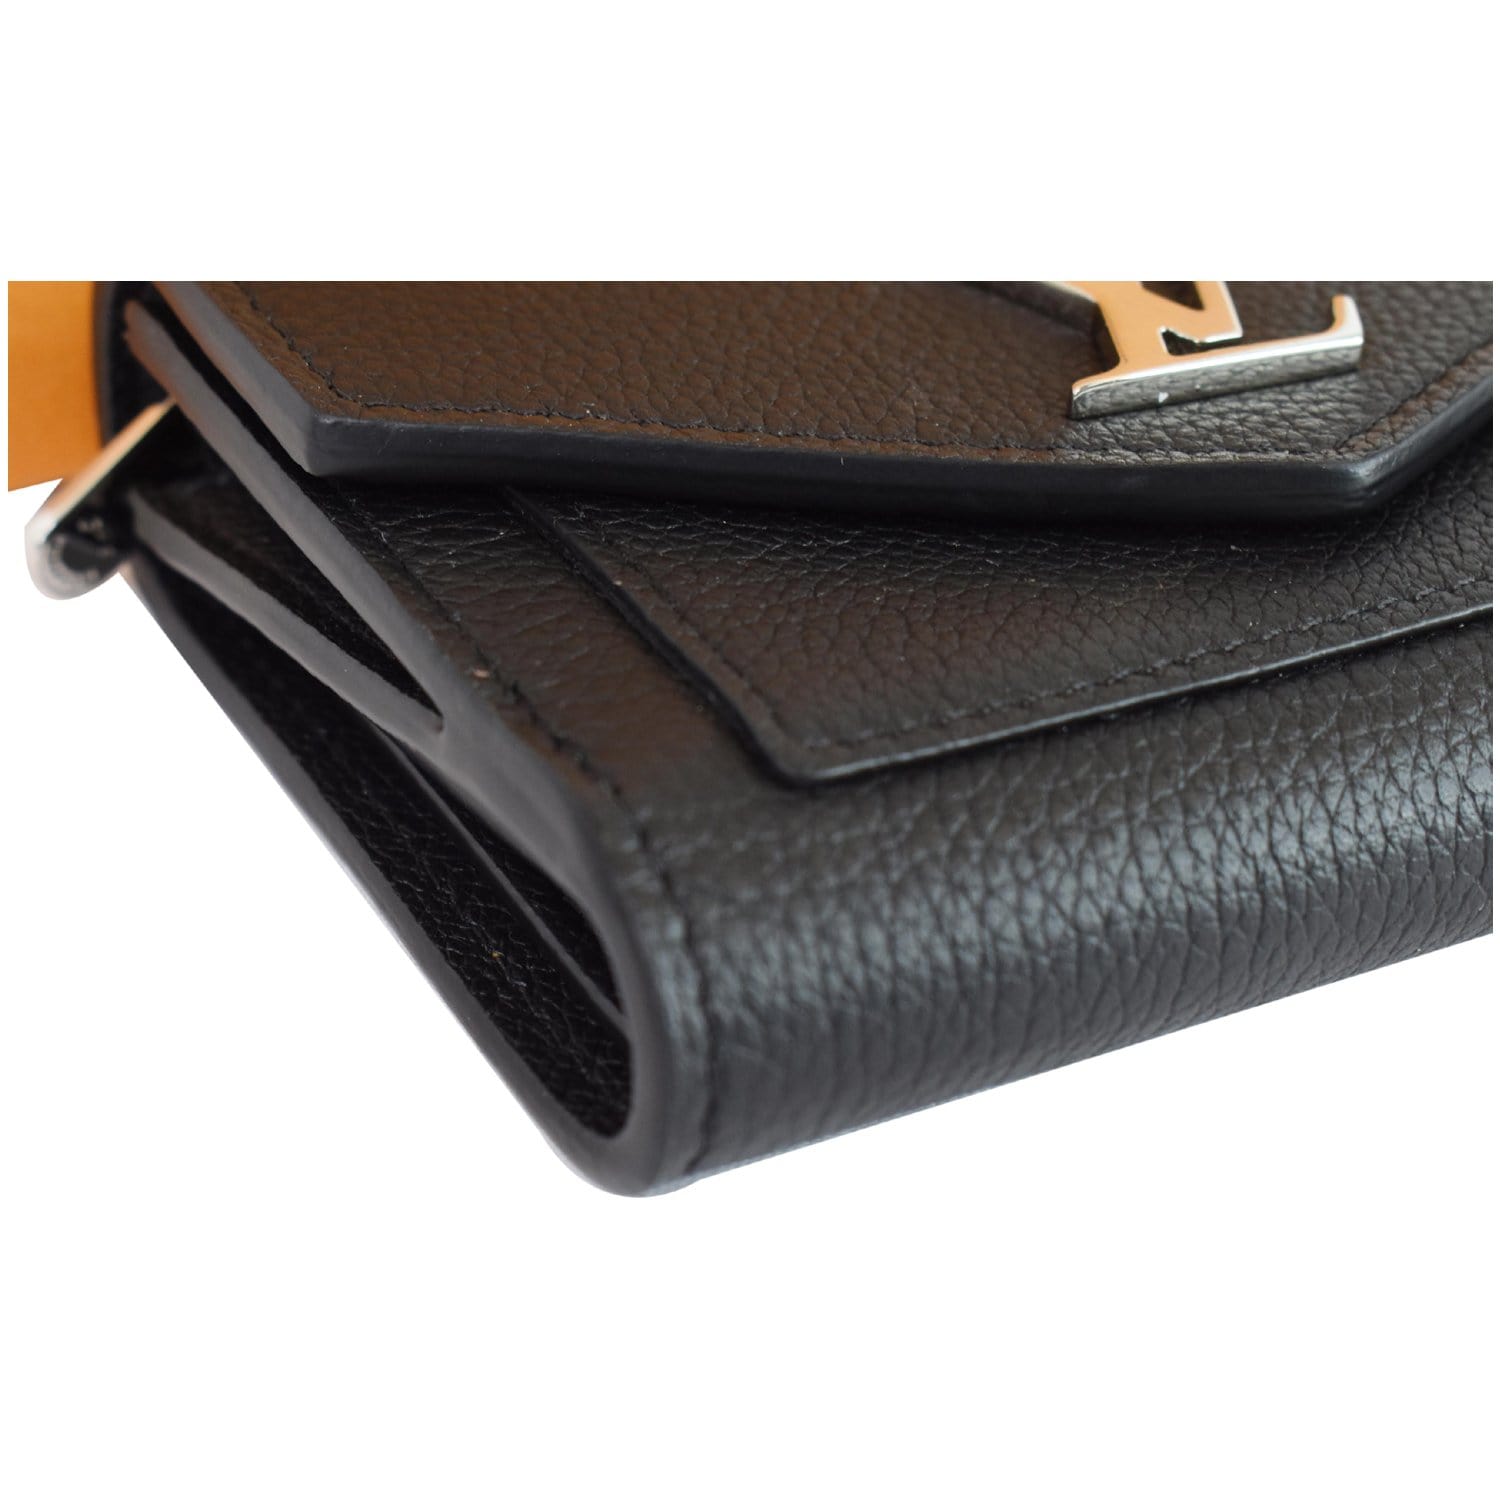 MyLockMe Compact Wallet Lockme Leather - Women - Small Leather Goods